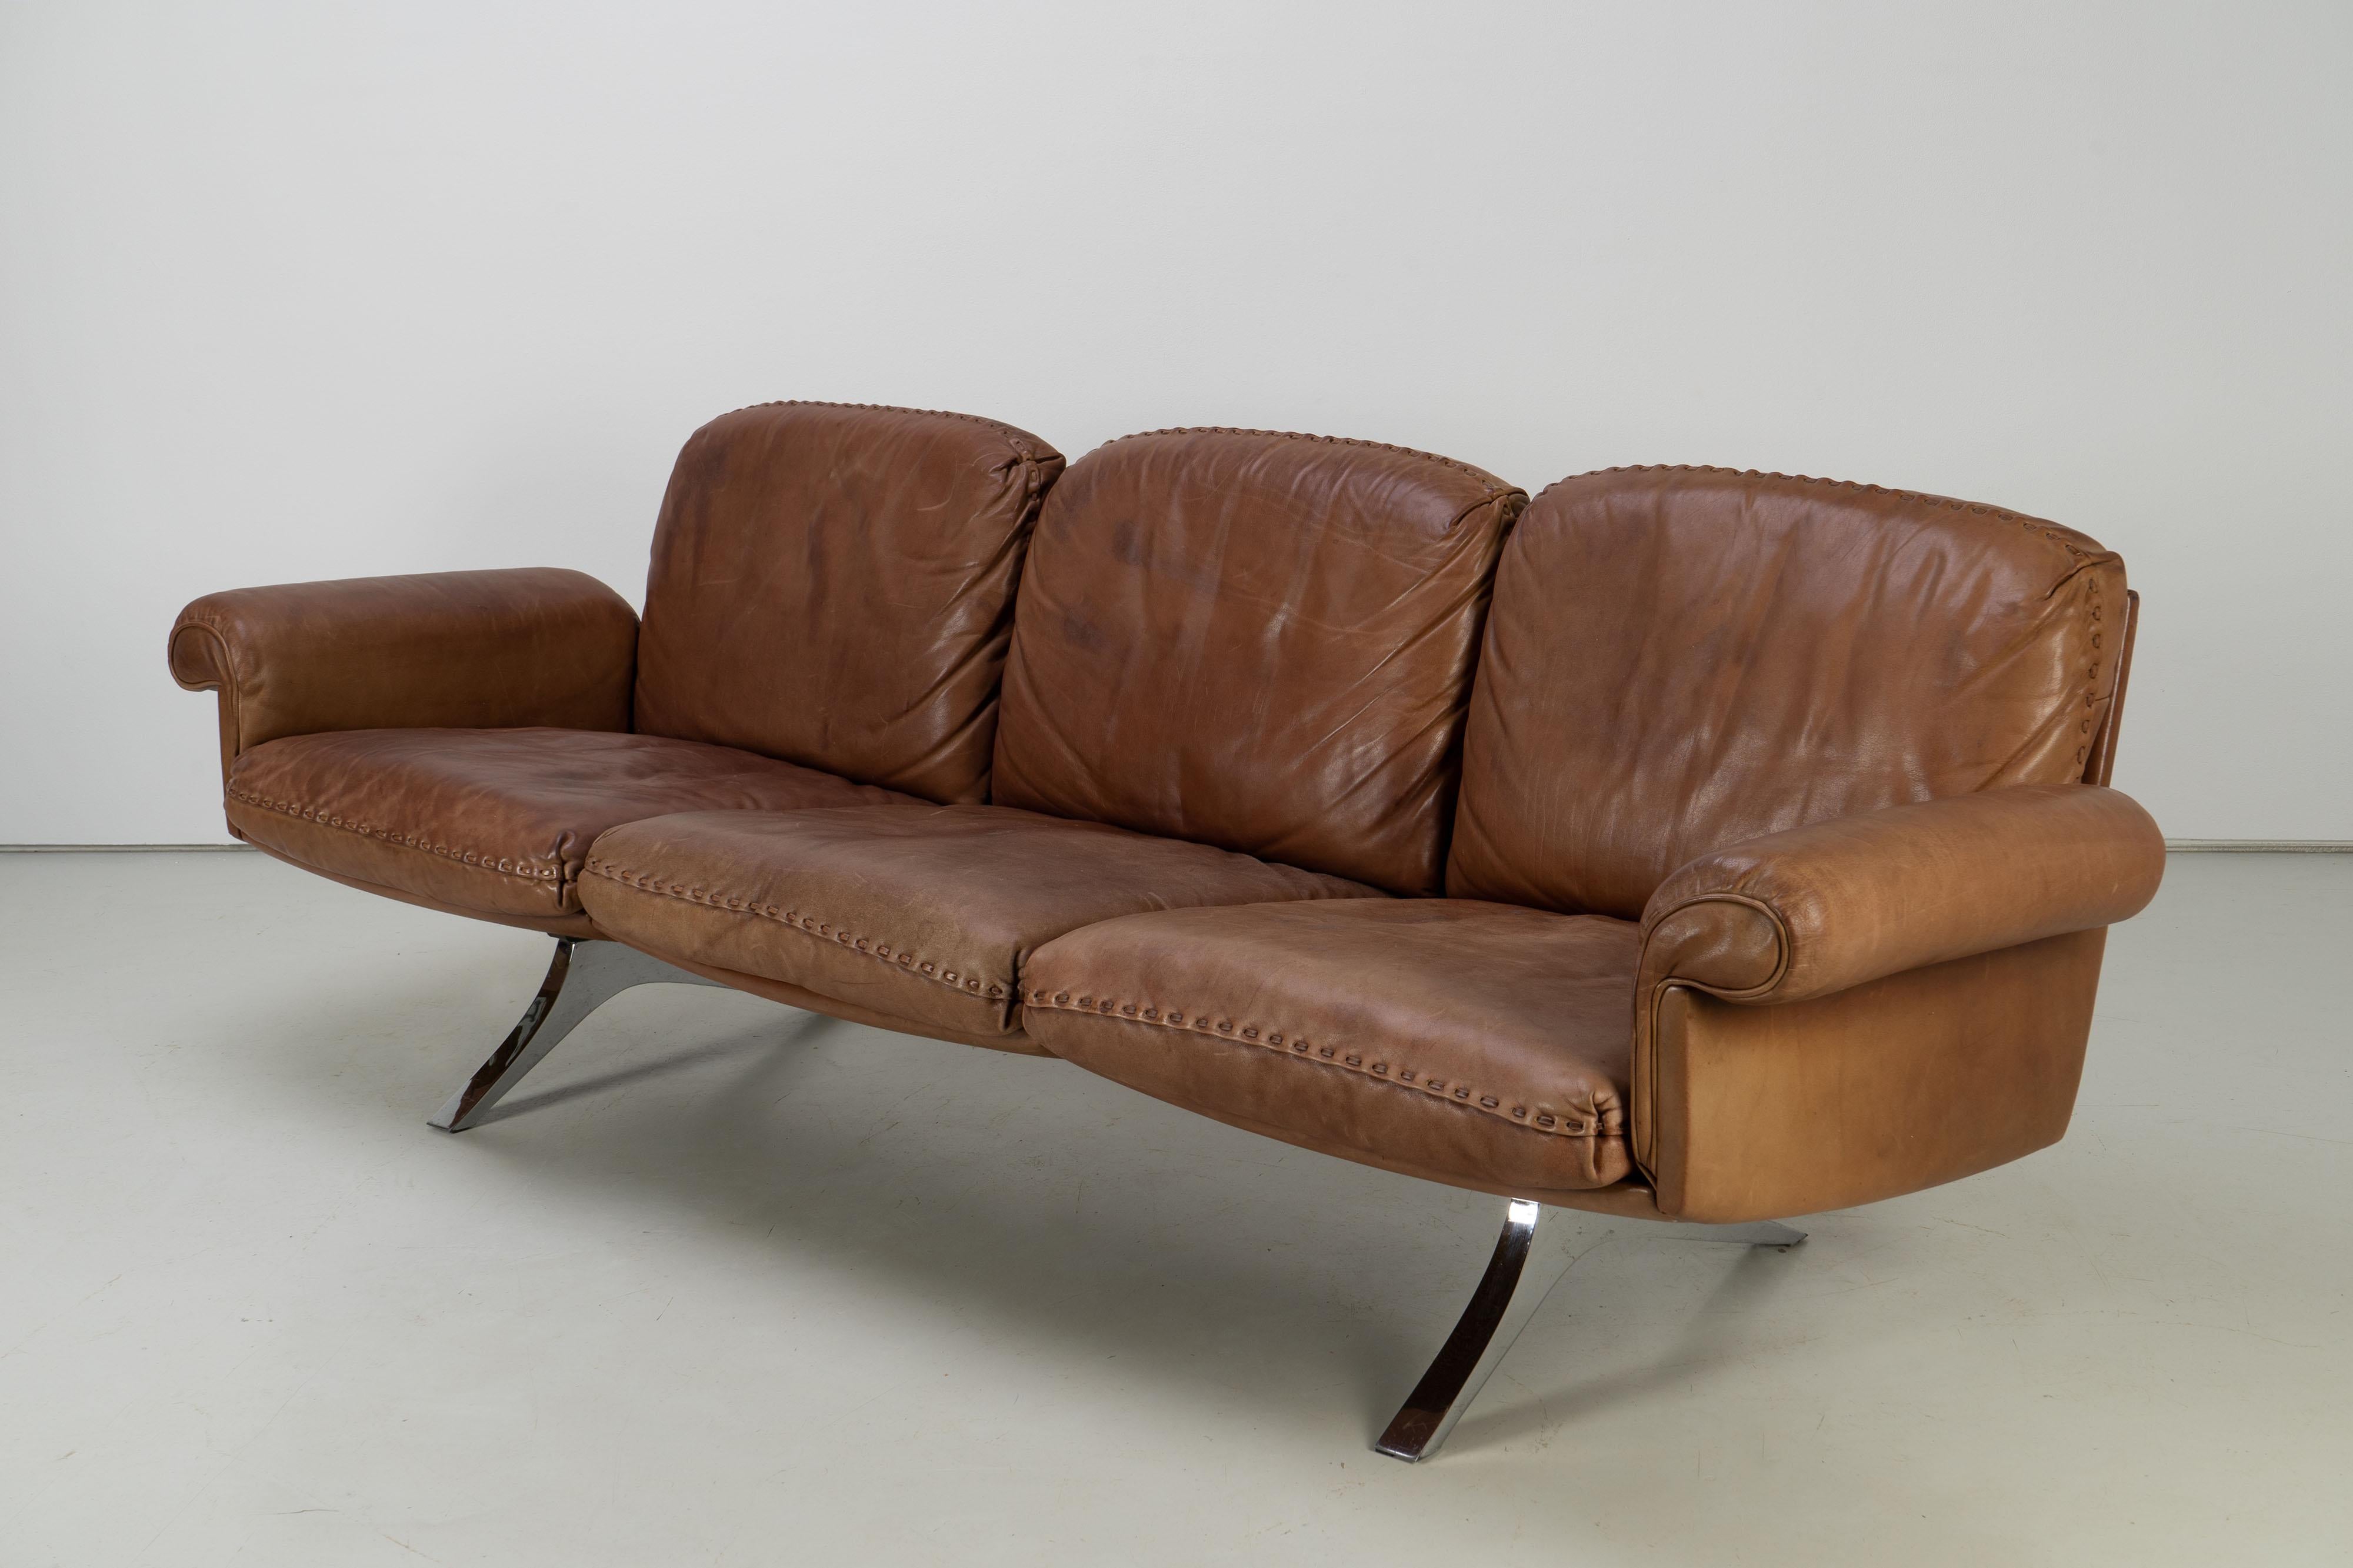 Vintage leather sofa from Swiss quality manufacturer de Sede. The brown buffalo leather is in very good condition and supple and soft, beautiful patina.

